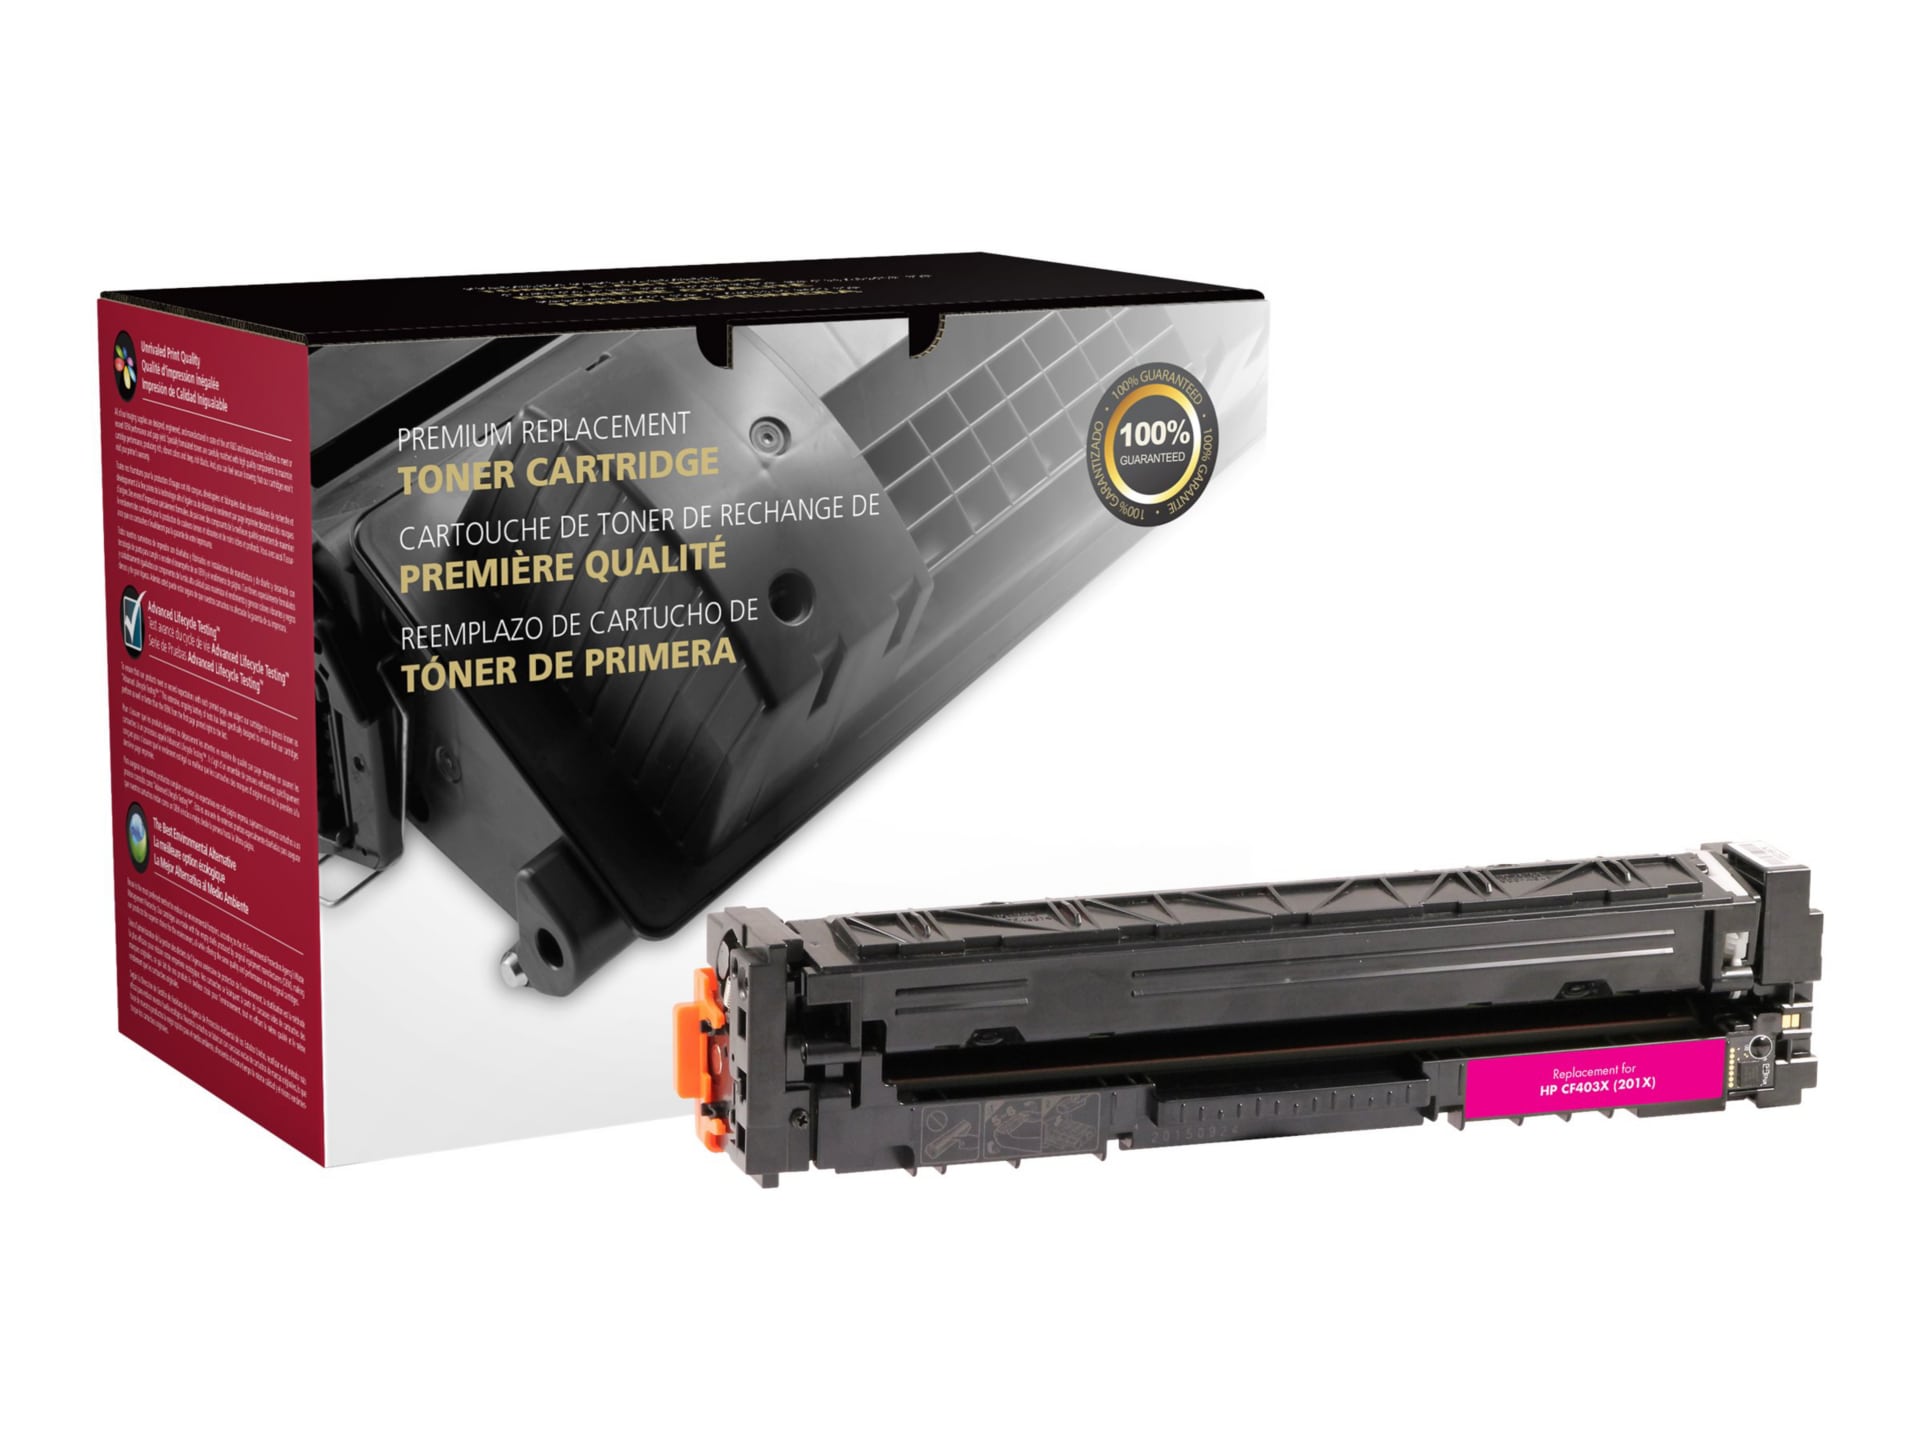 Clover Reman Toner for HP CF403X, Magenta, 2,300 page yield